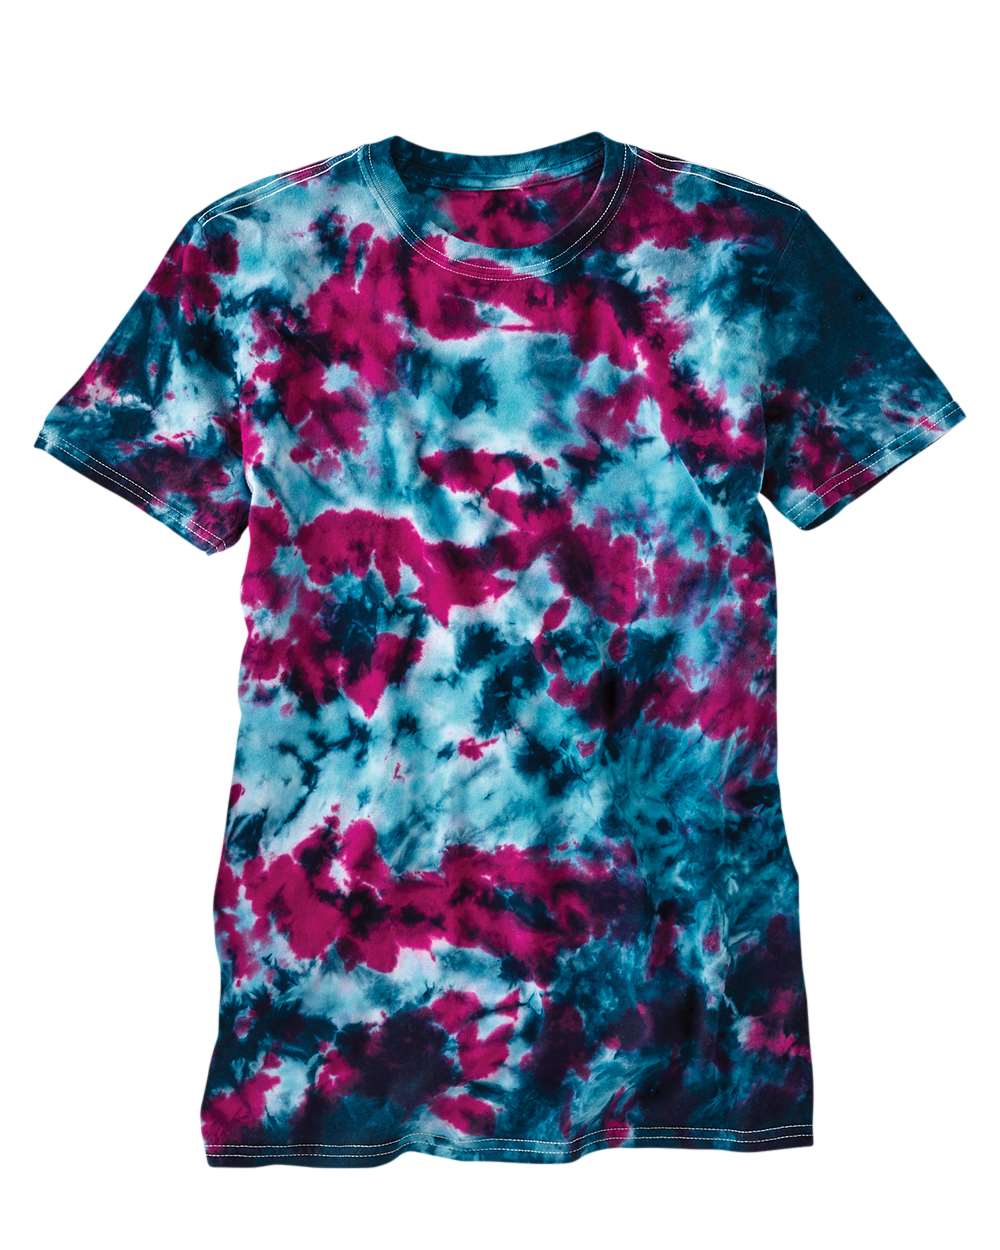 Dyenomite 640LM - LaMer Over-Dyed Crinkle Tie Dye T-Shirt